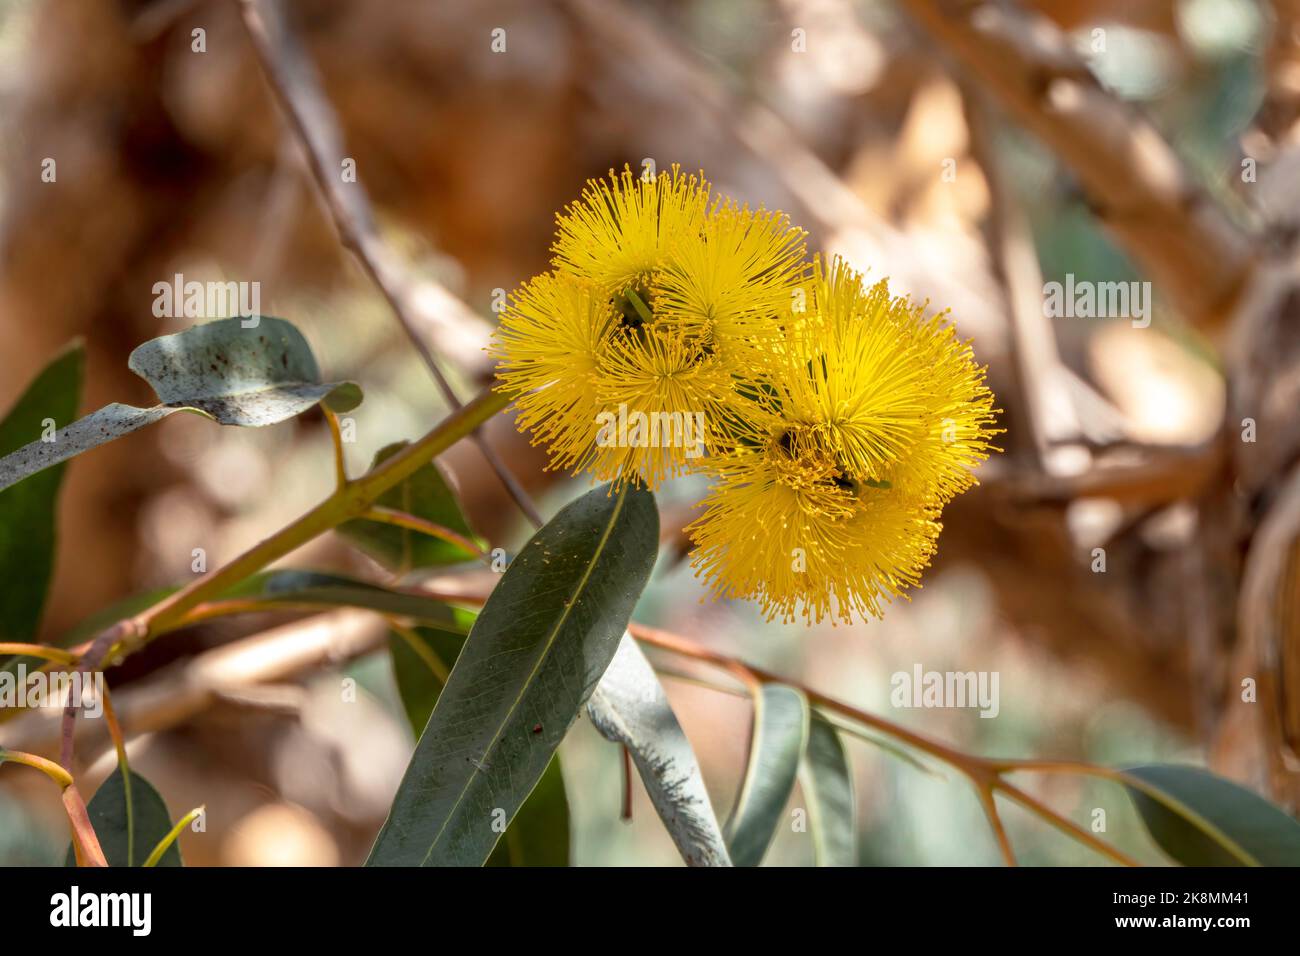 Buds and yellow flowers of a flowering Eucalyptus Erythrocorys tree close up. Stock Photo